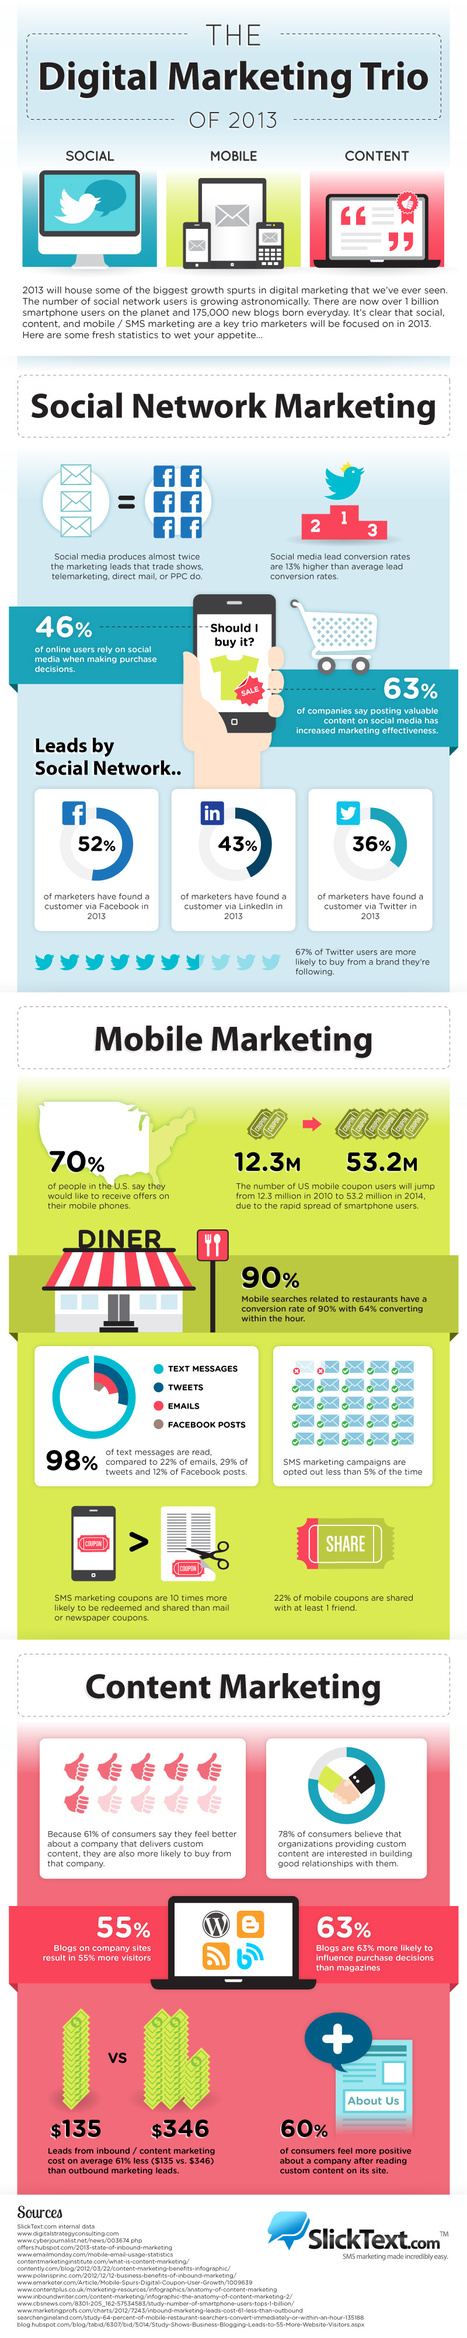 The Digital Marketing Trio Of 2013 [Infographic] | Business Improvement and Social media | Scoop.it